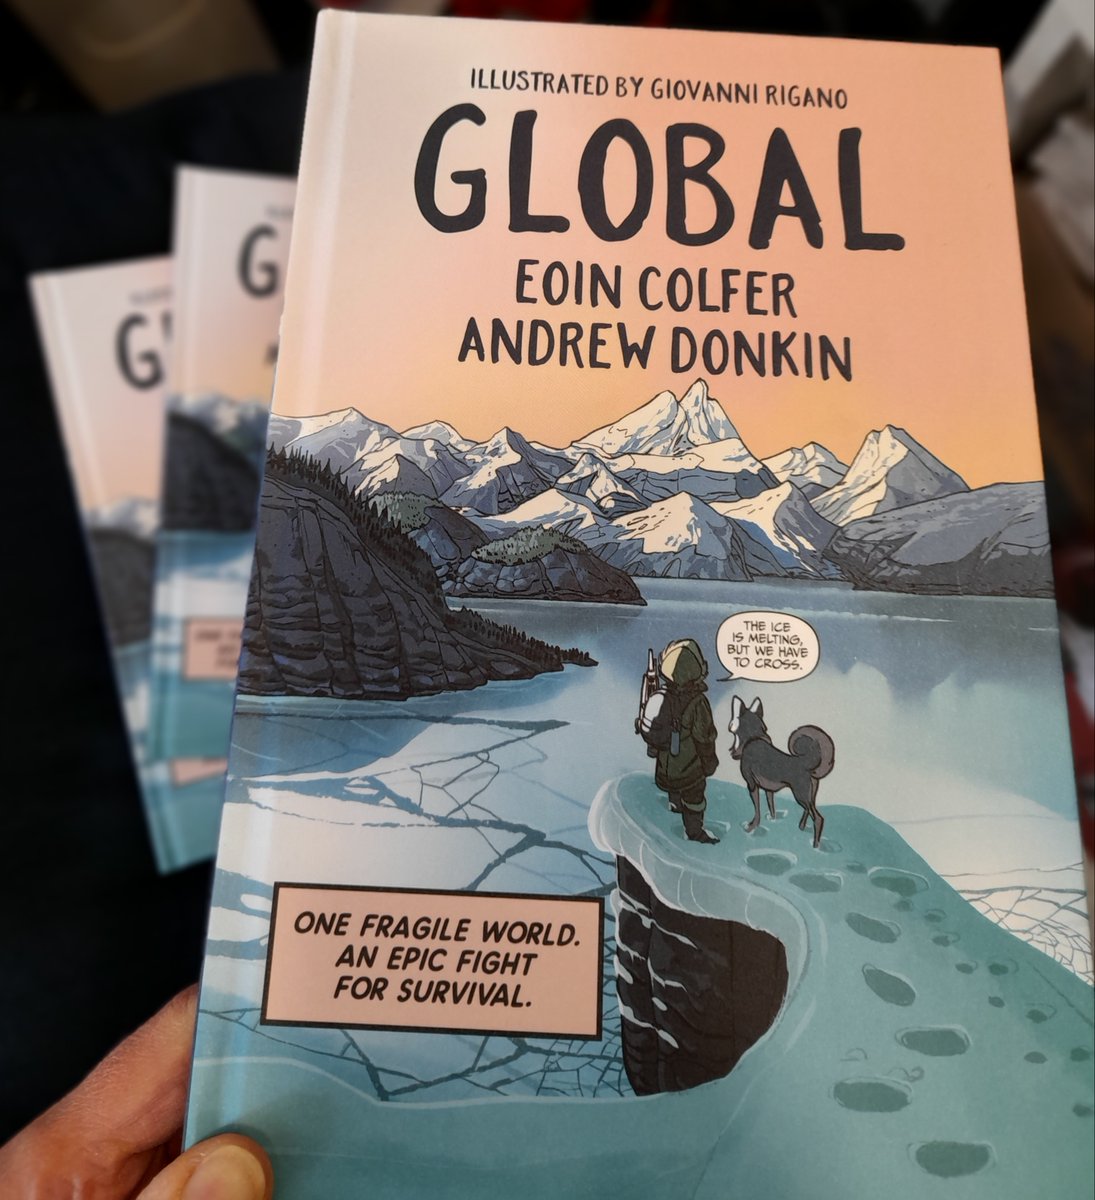 From the team who brought you Illegal, a graphic novel about how the climate catastrophe impacts two very different lives
#GlobalGraphicNovel
@EoinColfer @AndrewDonkin @GiovanniRigano @HachetteKids